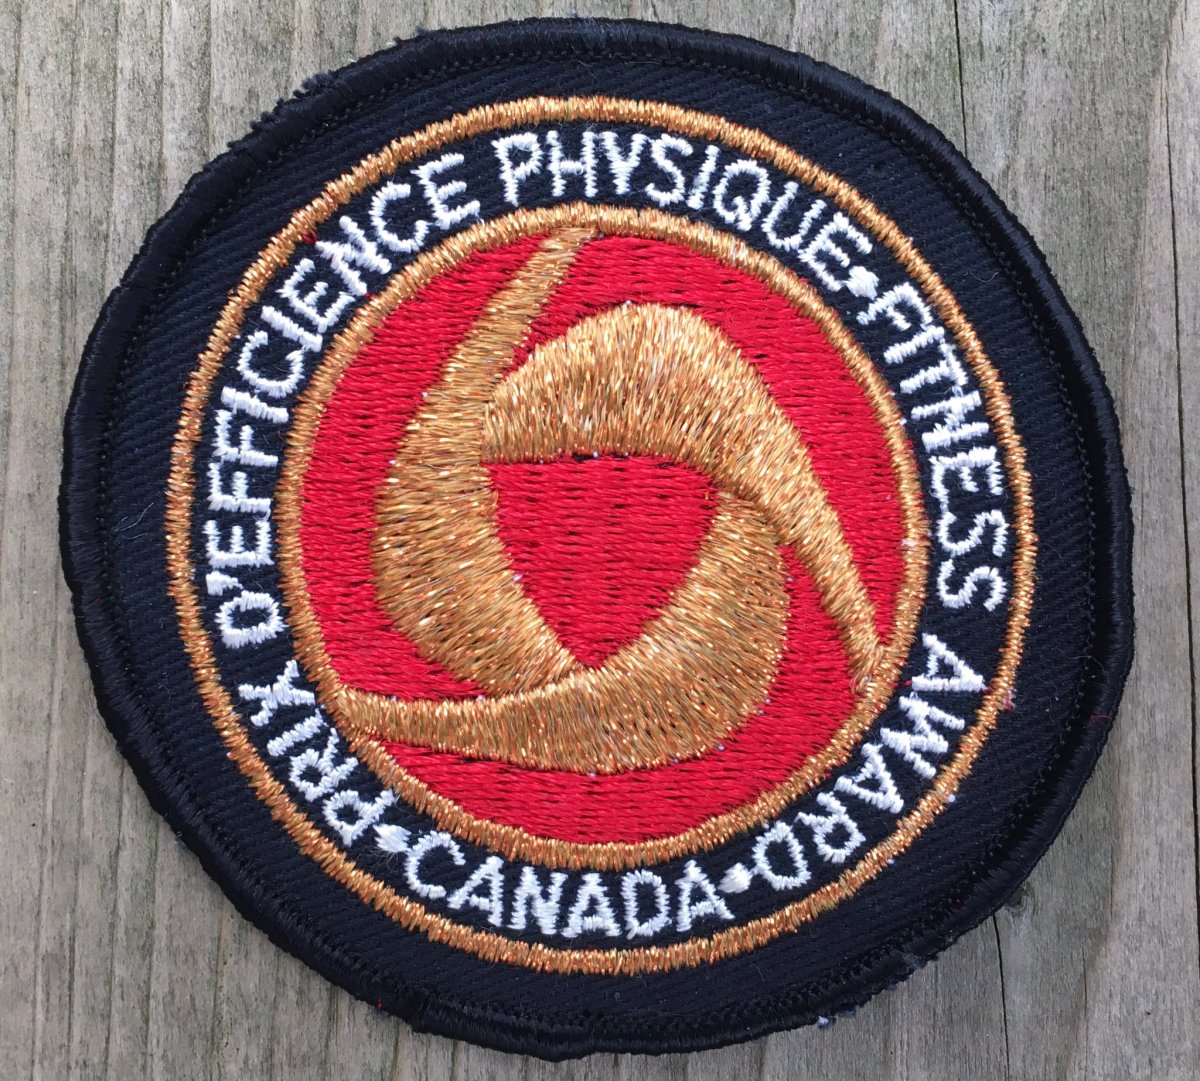 The Canada Fitness Badge was a program that ran from 1970 to 1992.